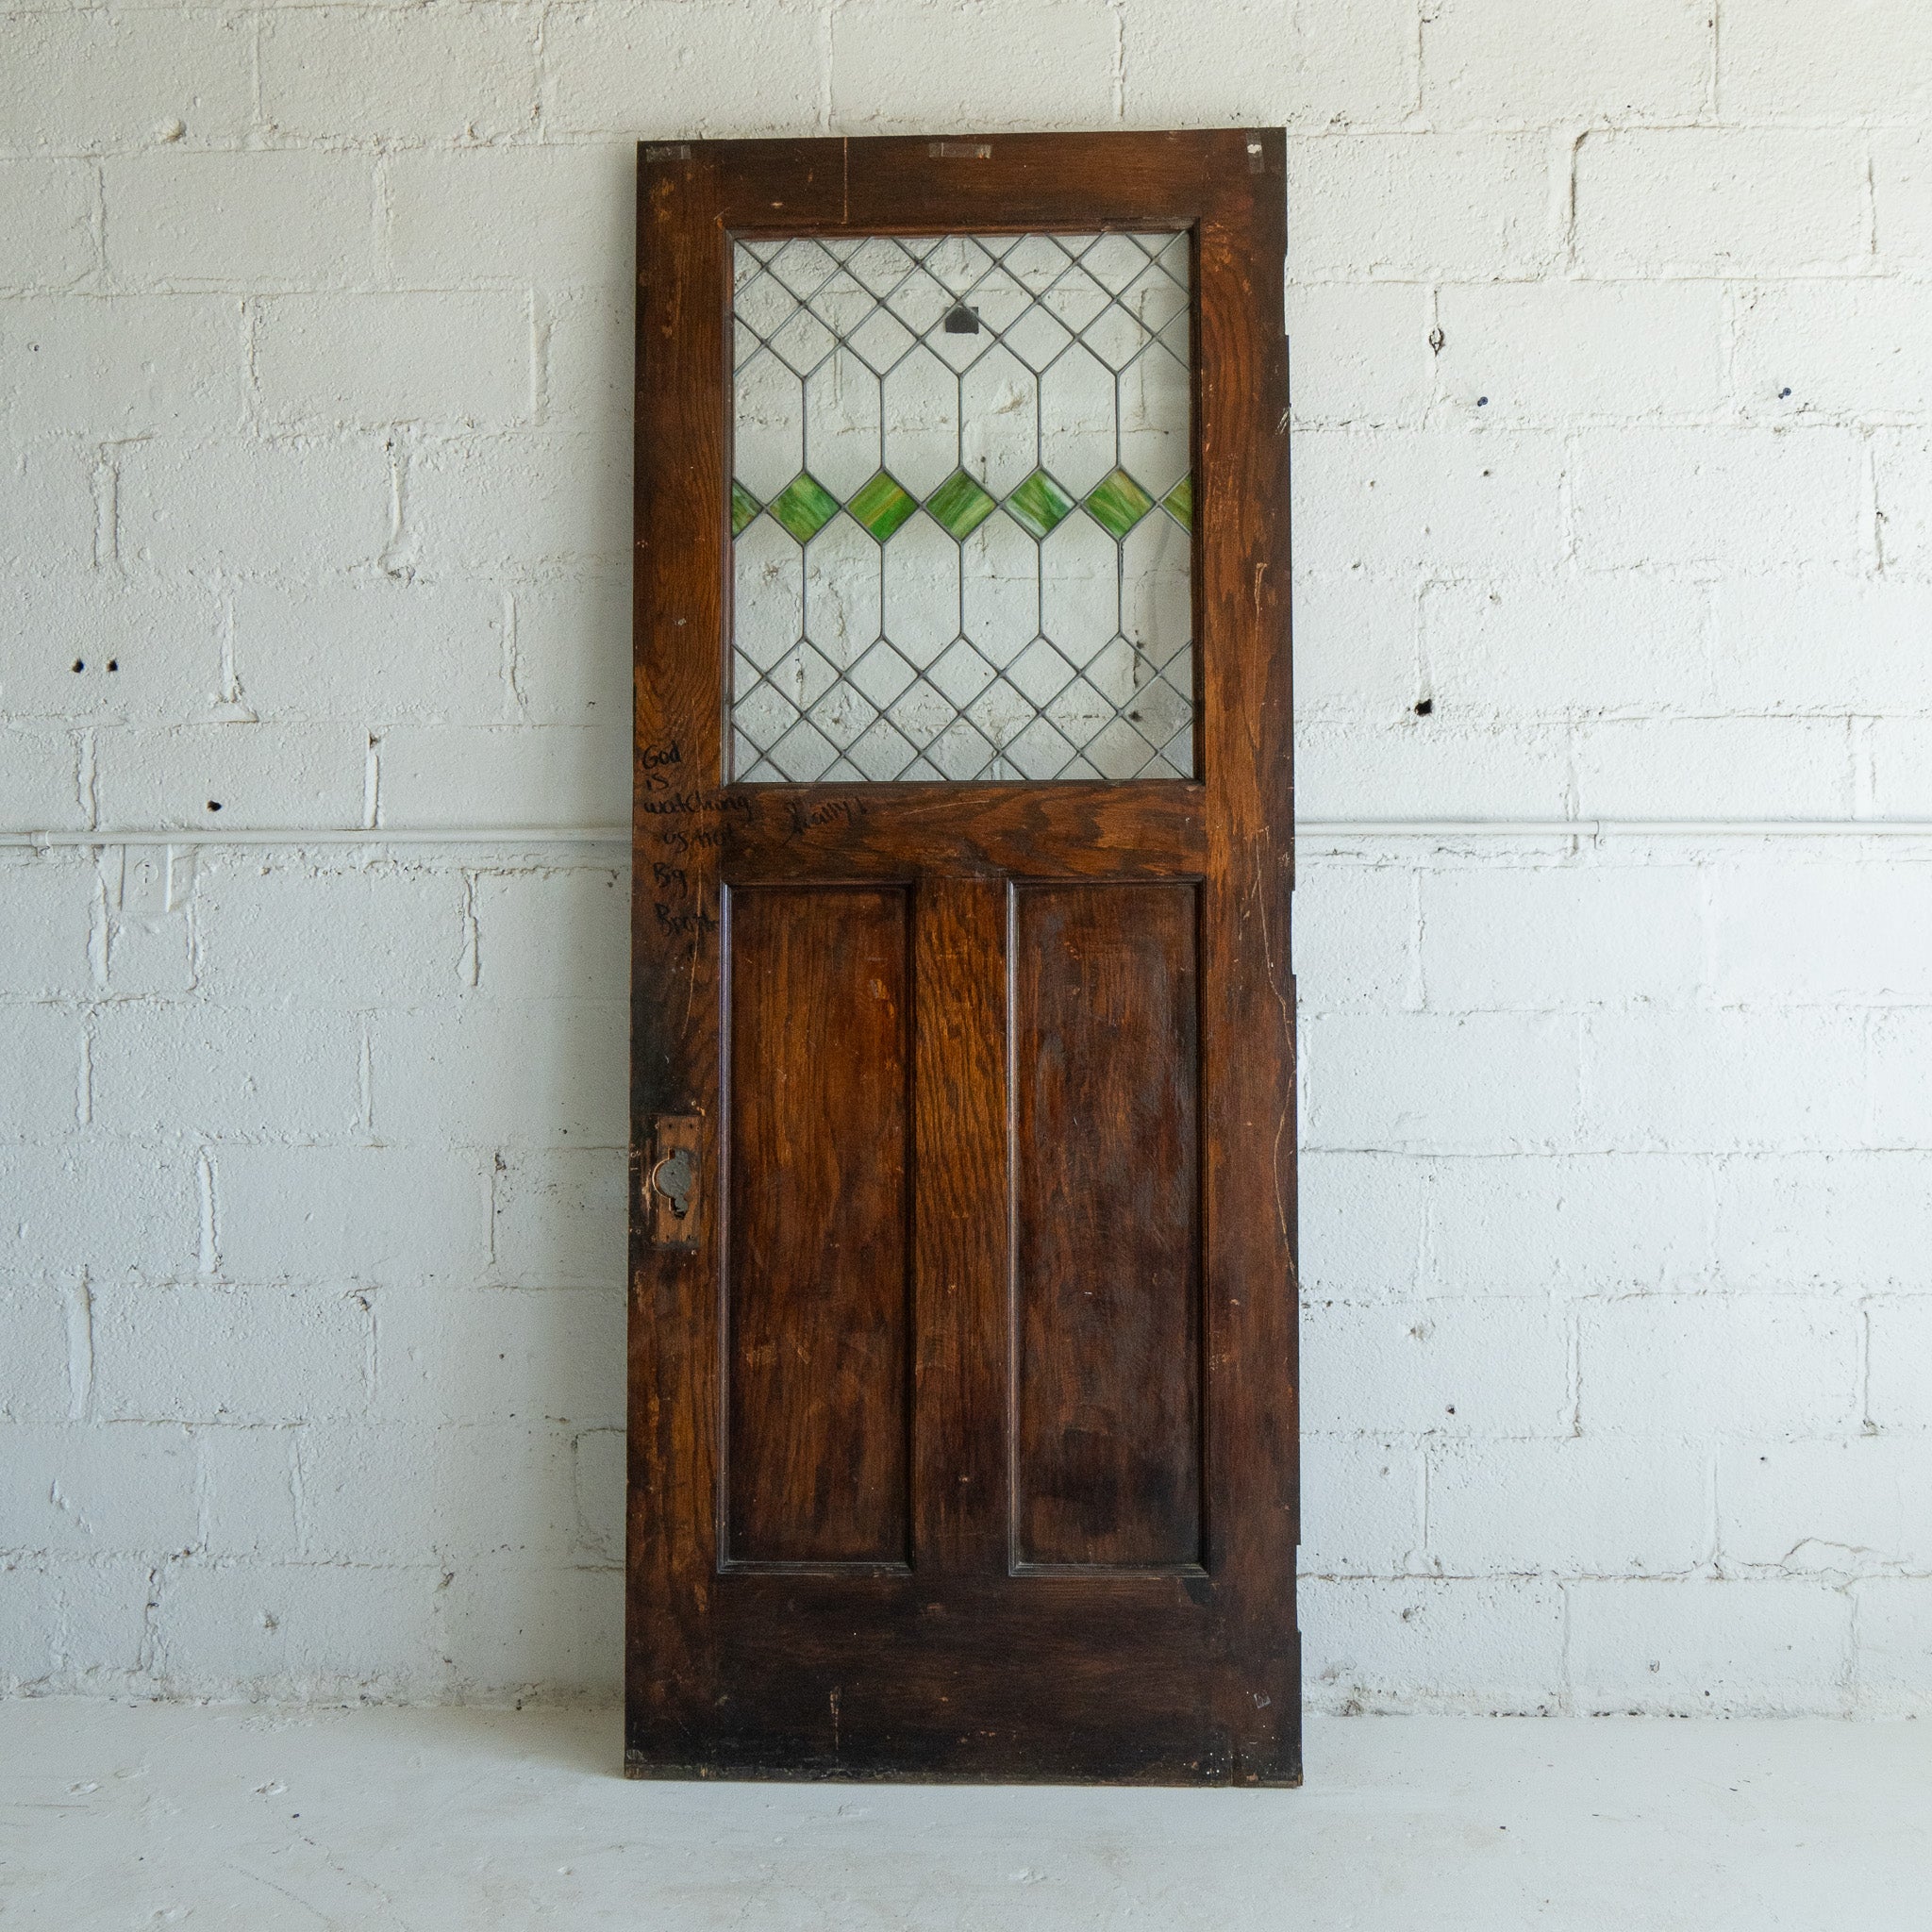 Salvaged Oak door with Stained Glass